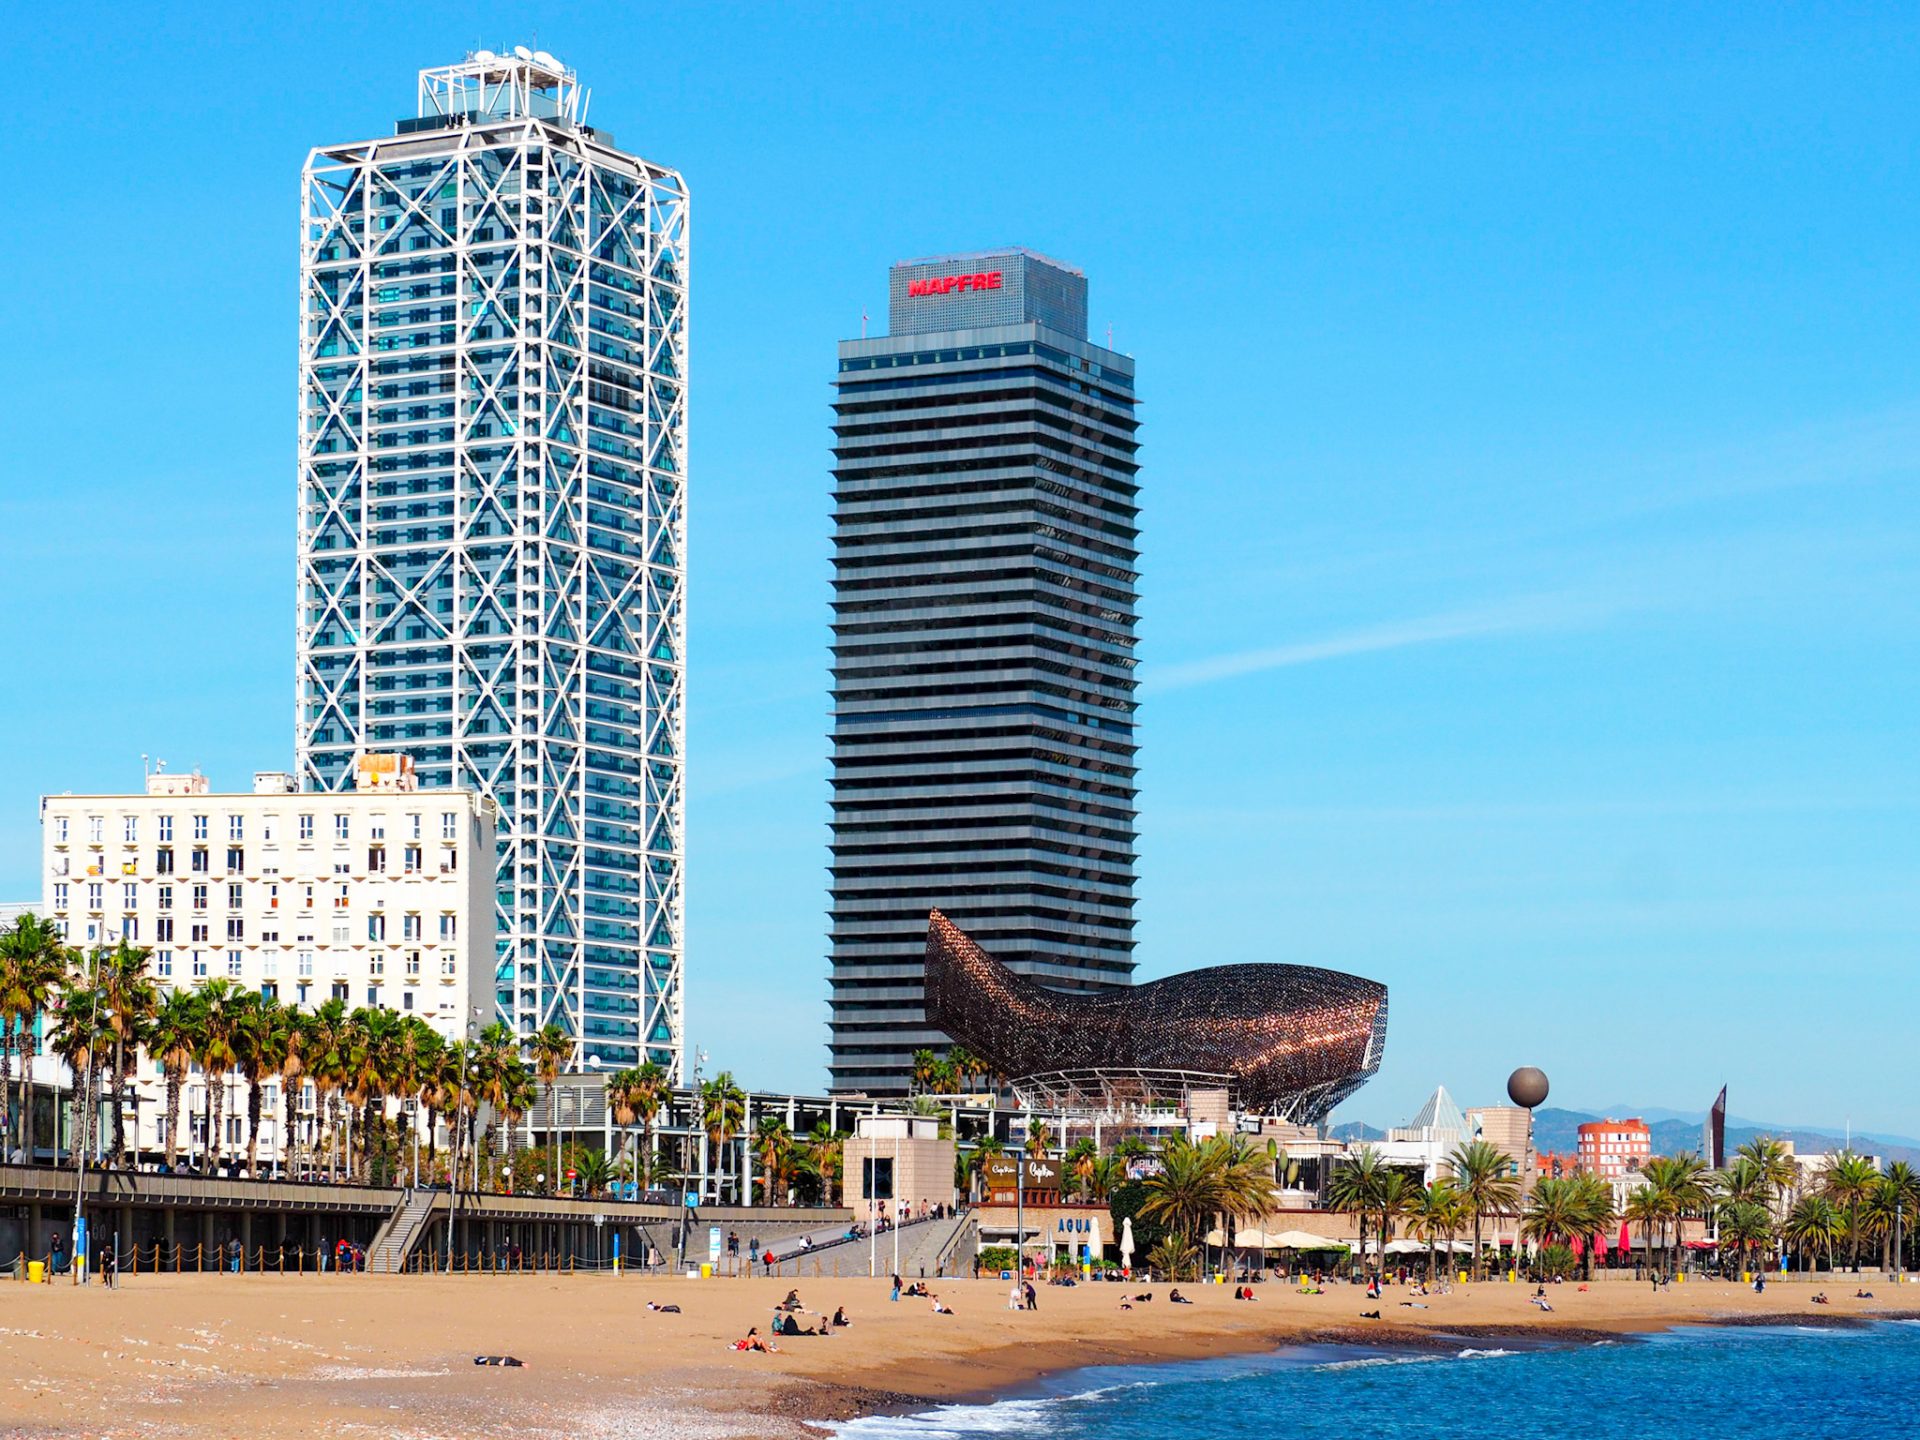 Barcelona beach, the Arts Hotel and the fish sculpture by Frank Ghery.